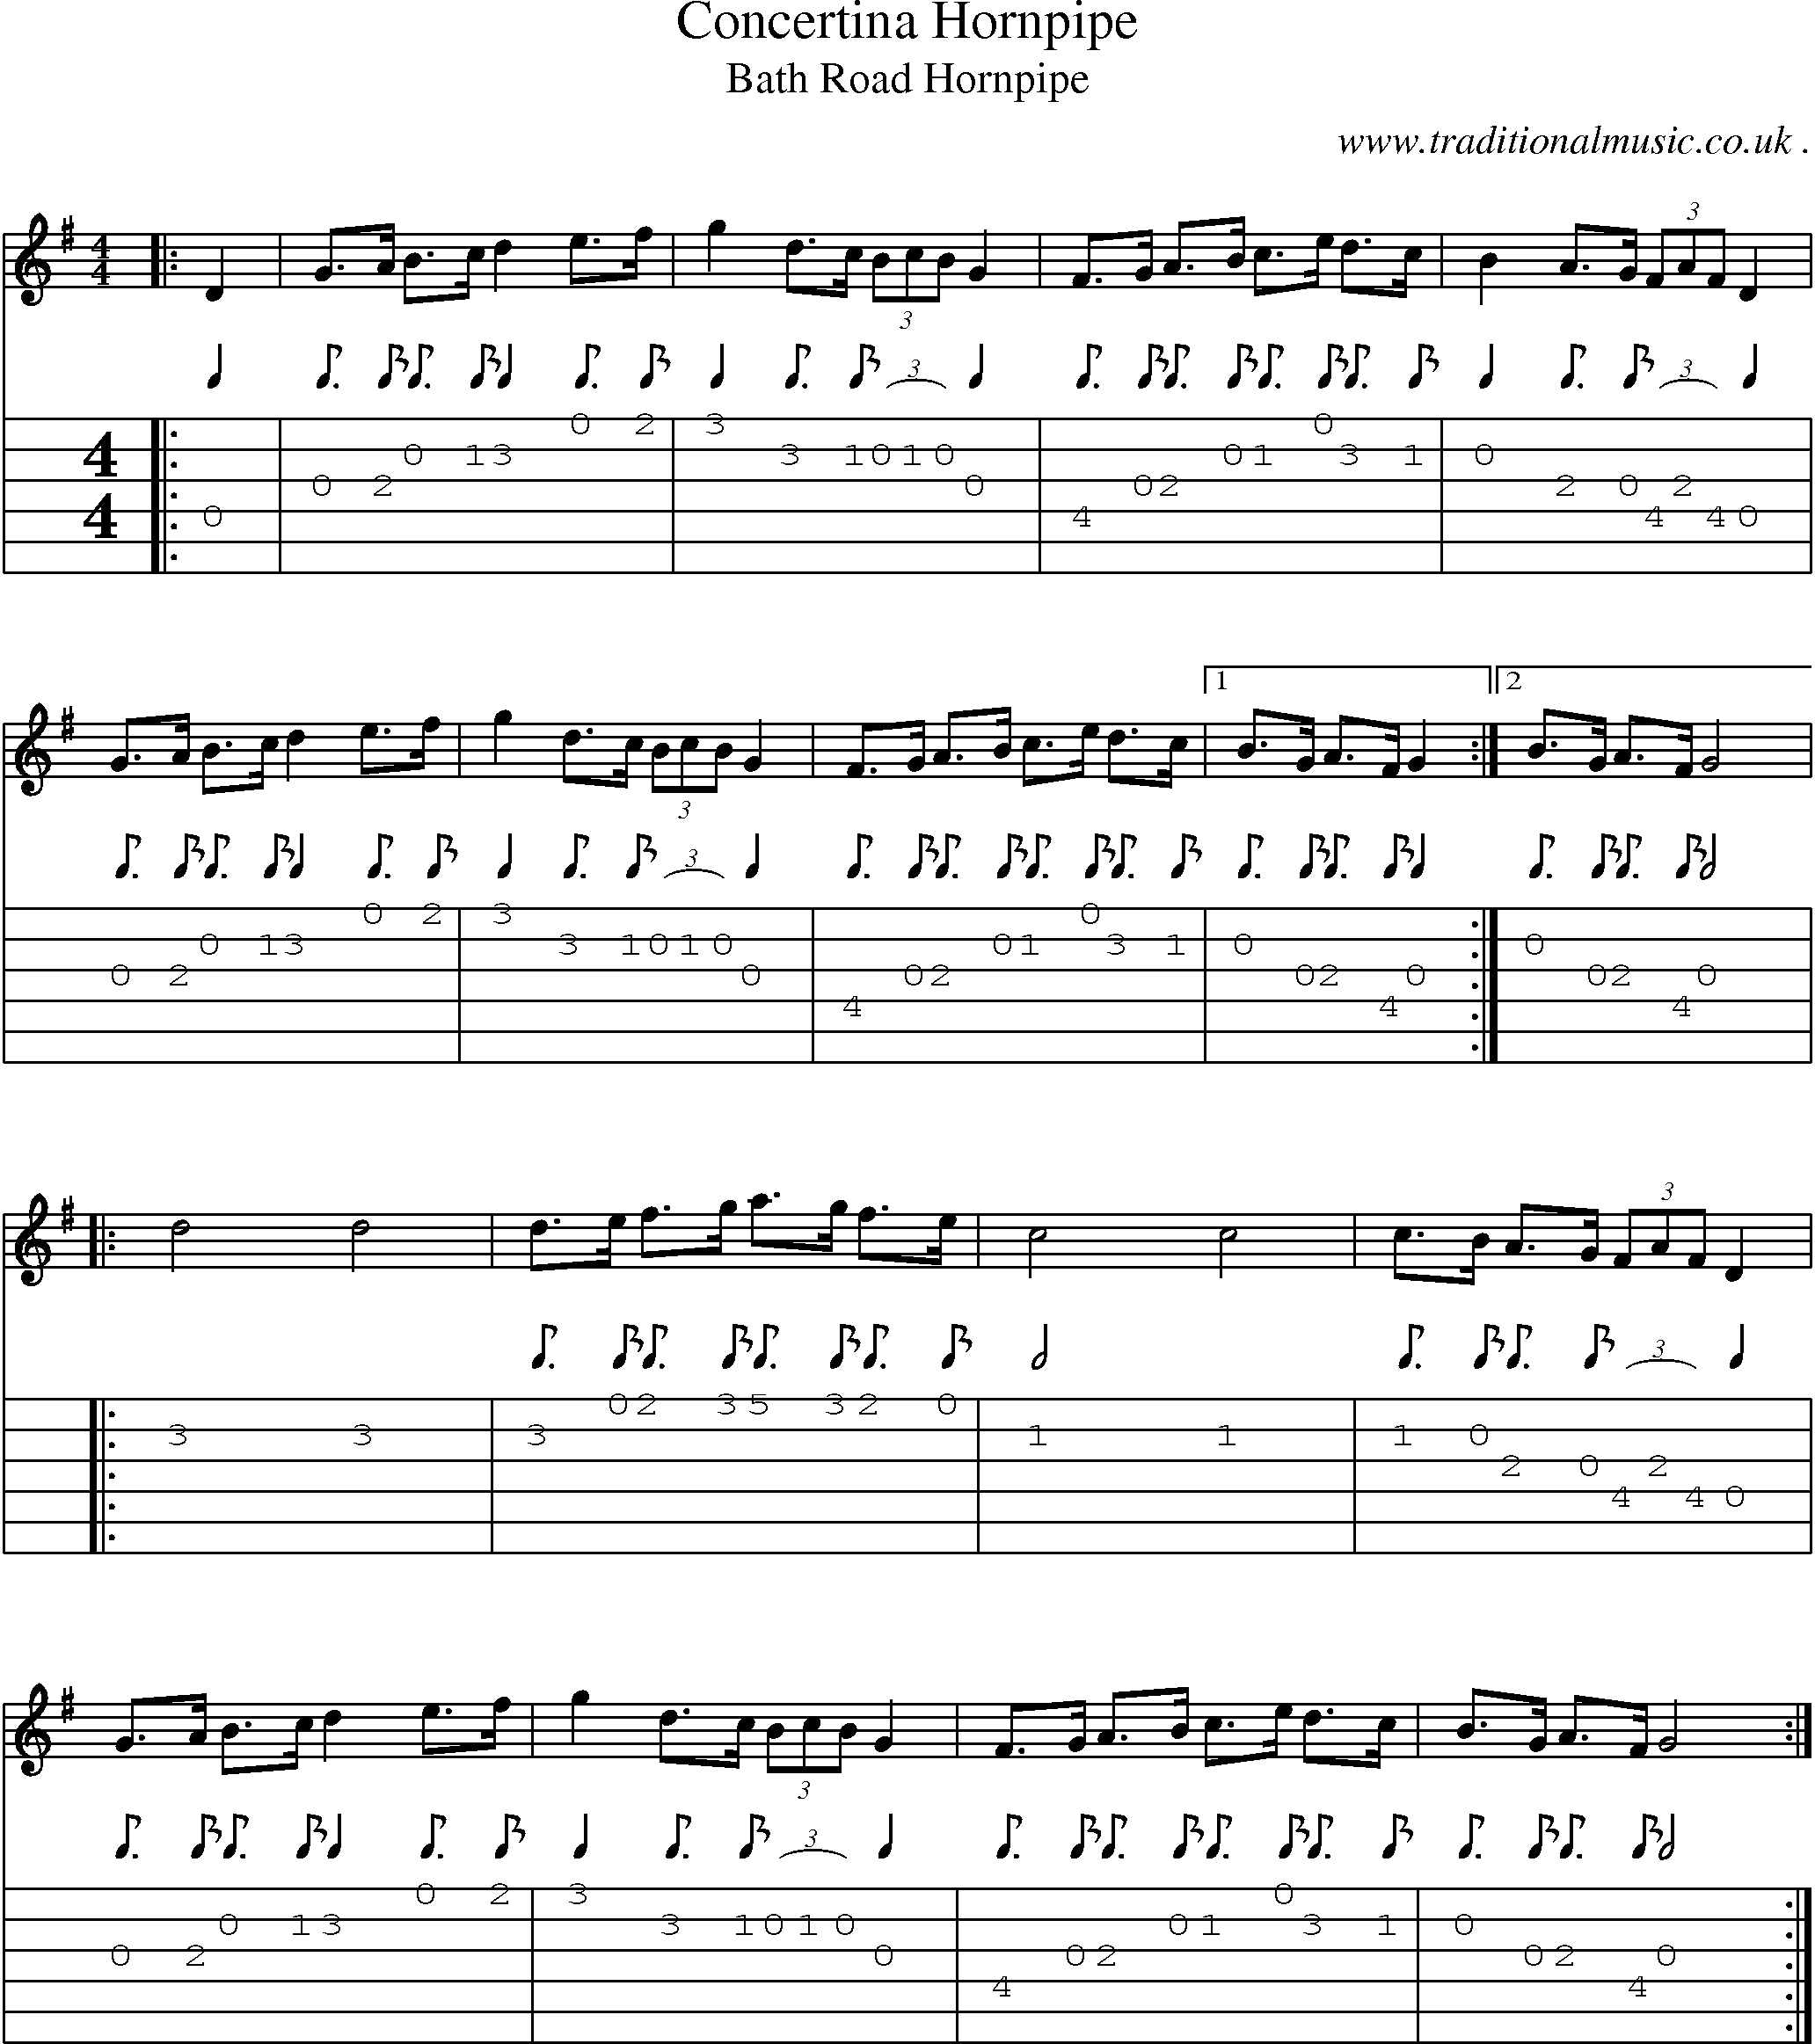 Sheet-Music and Guitar Tabs for Concertina Hornpipe